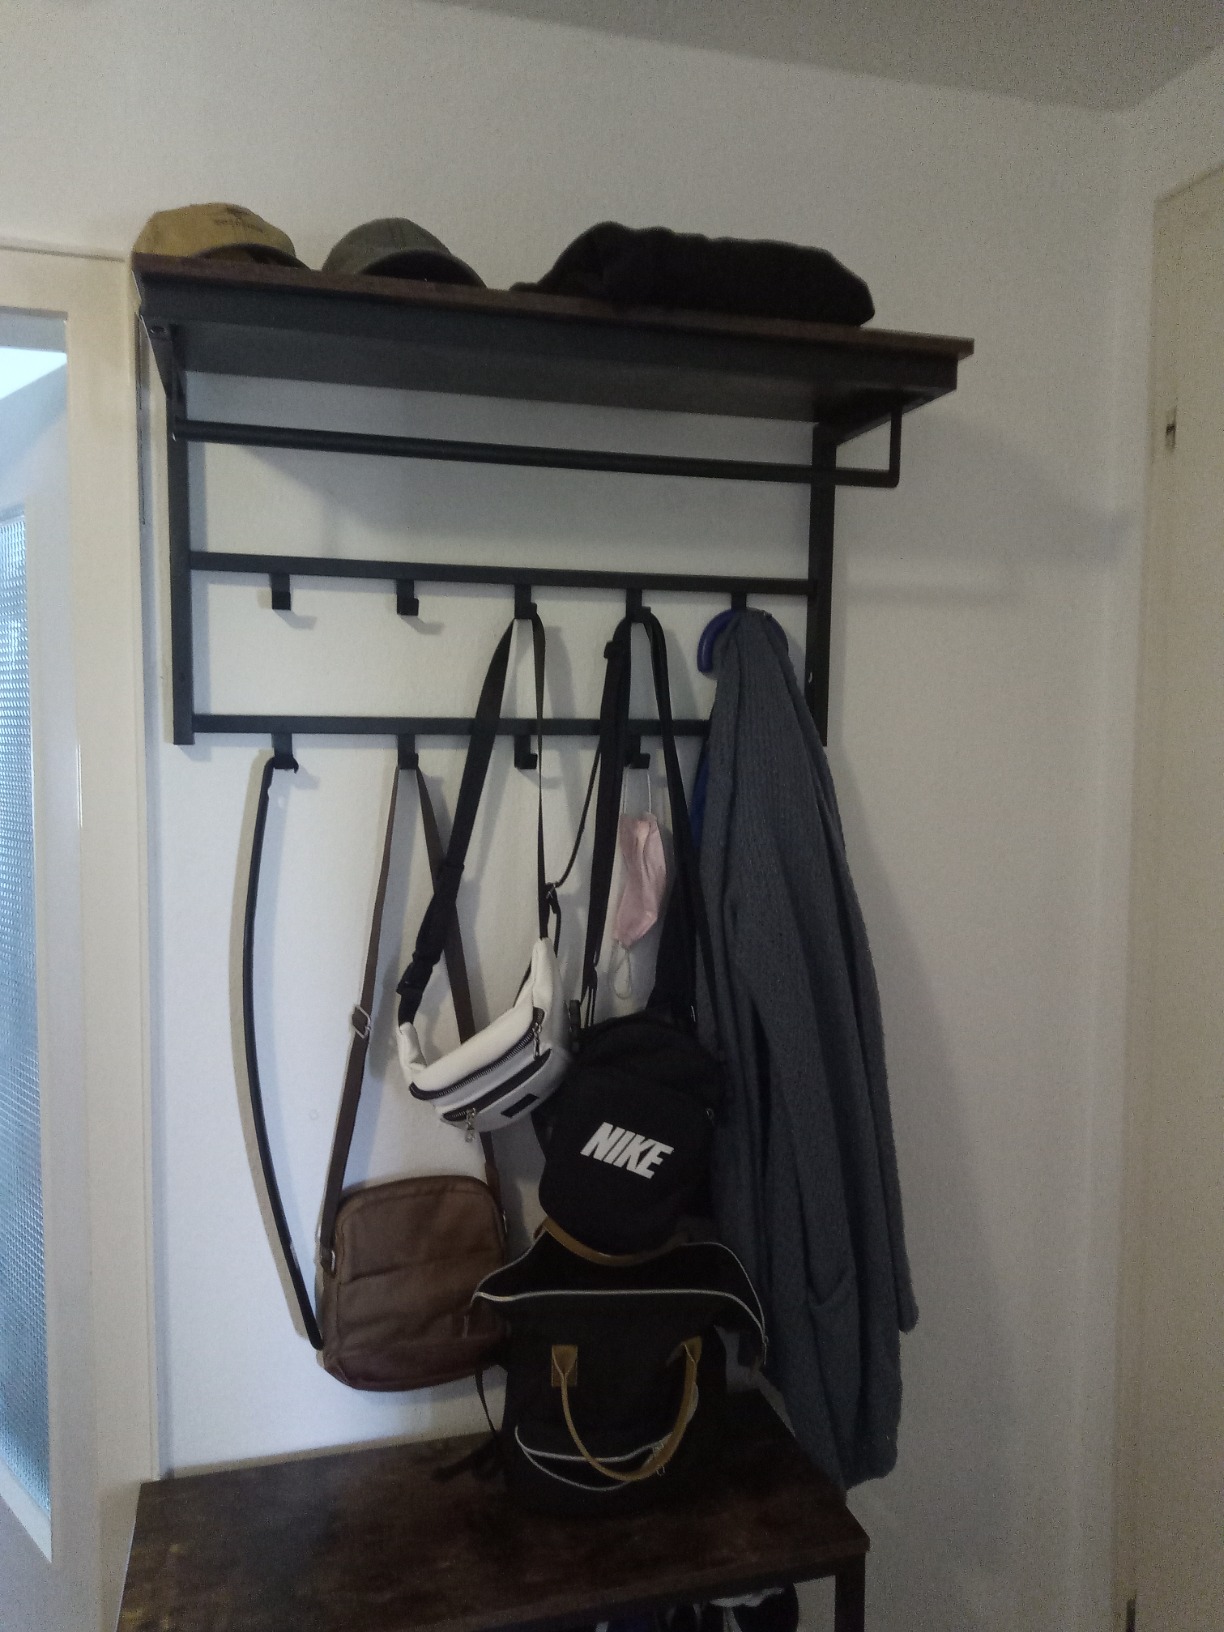 BF12YM01 Wall Mount Coat Rack photo review